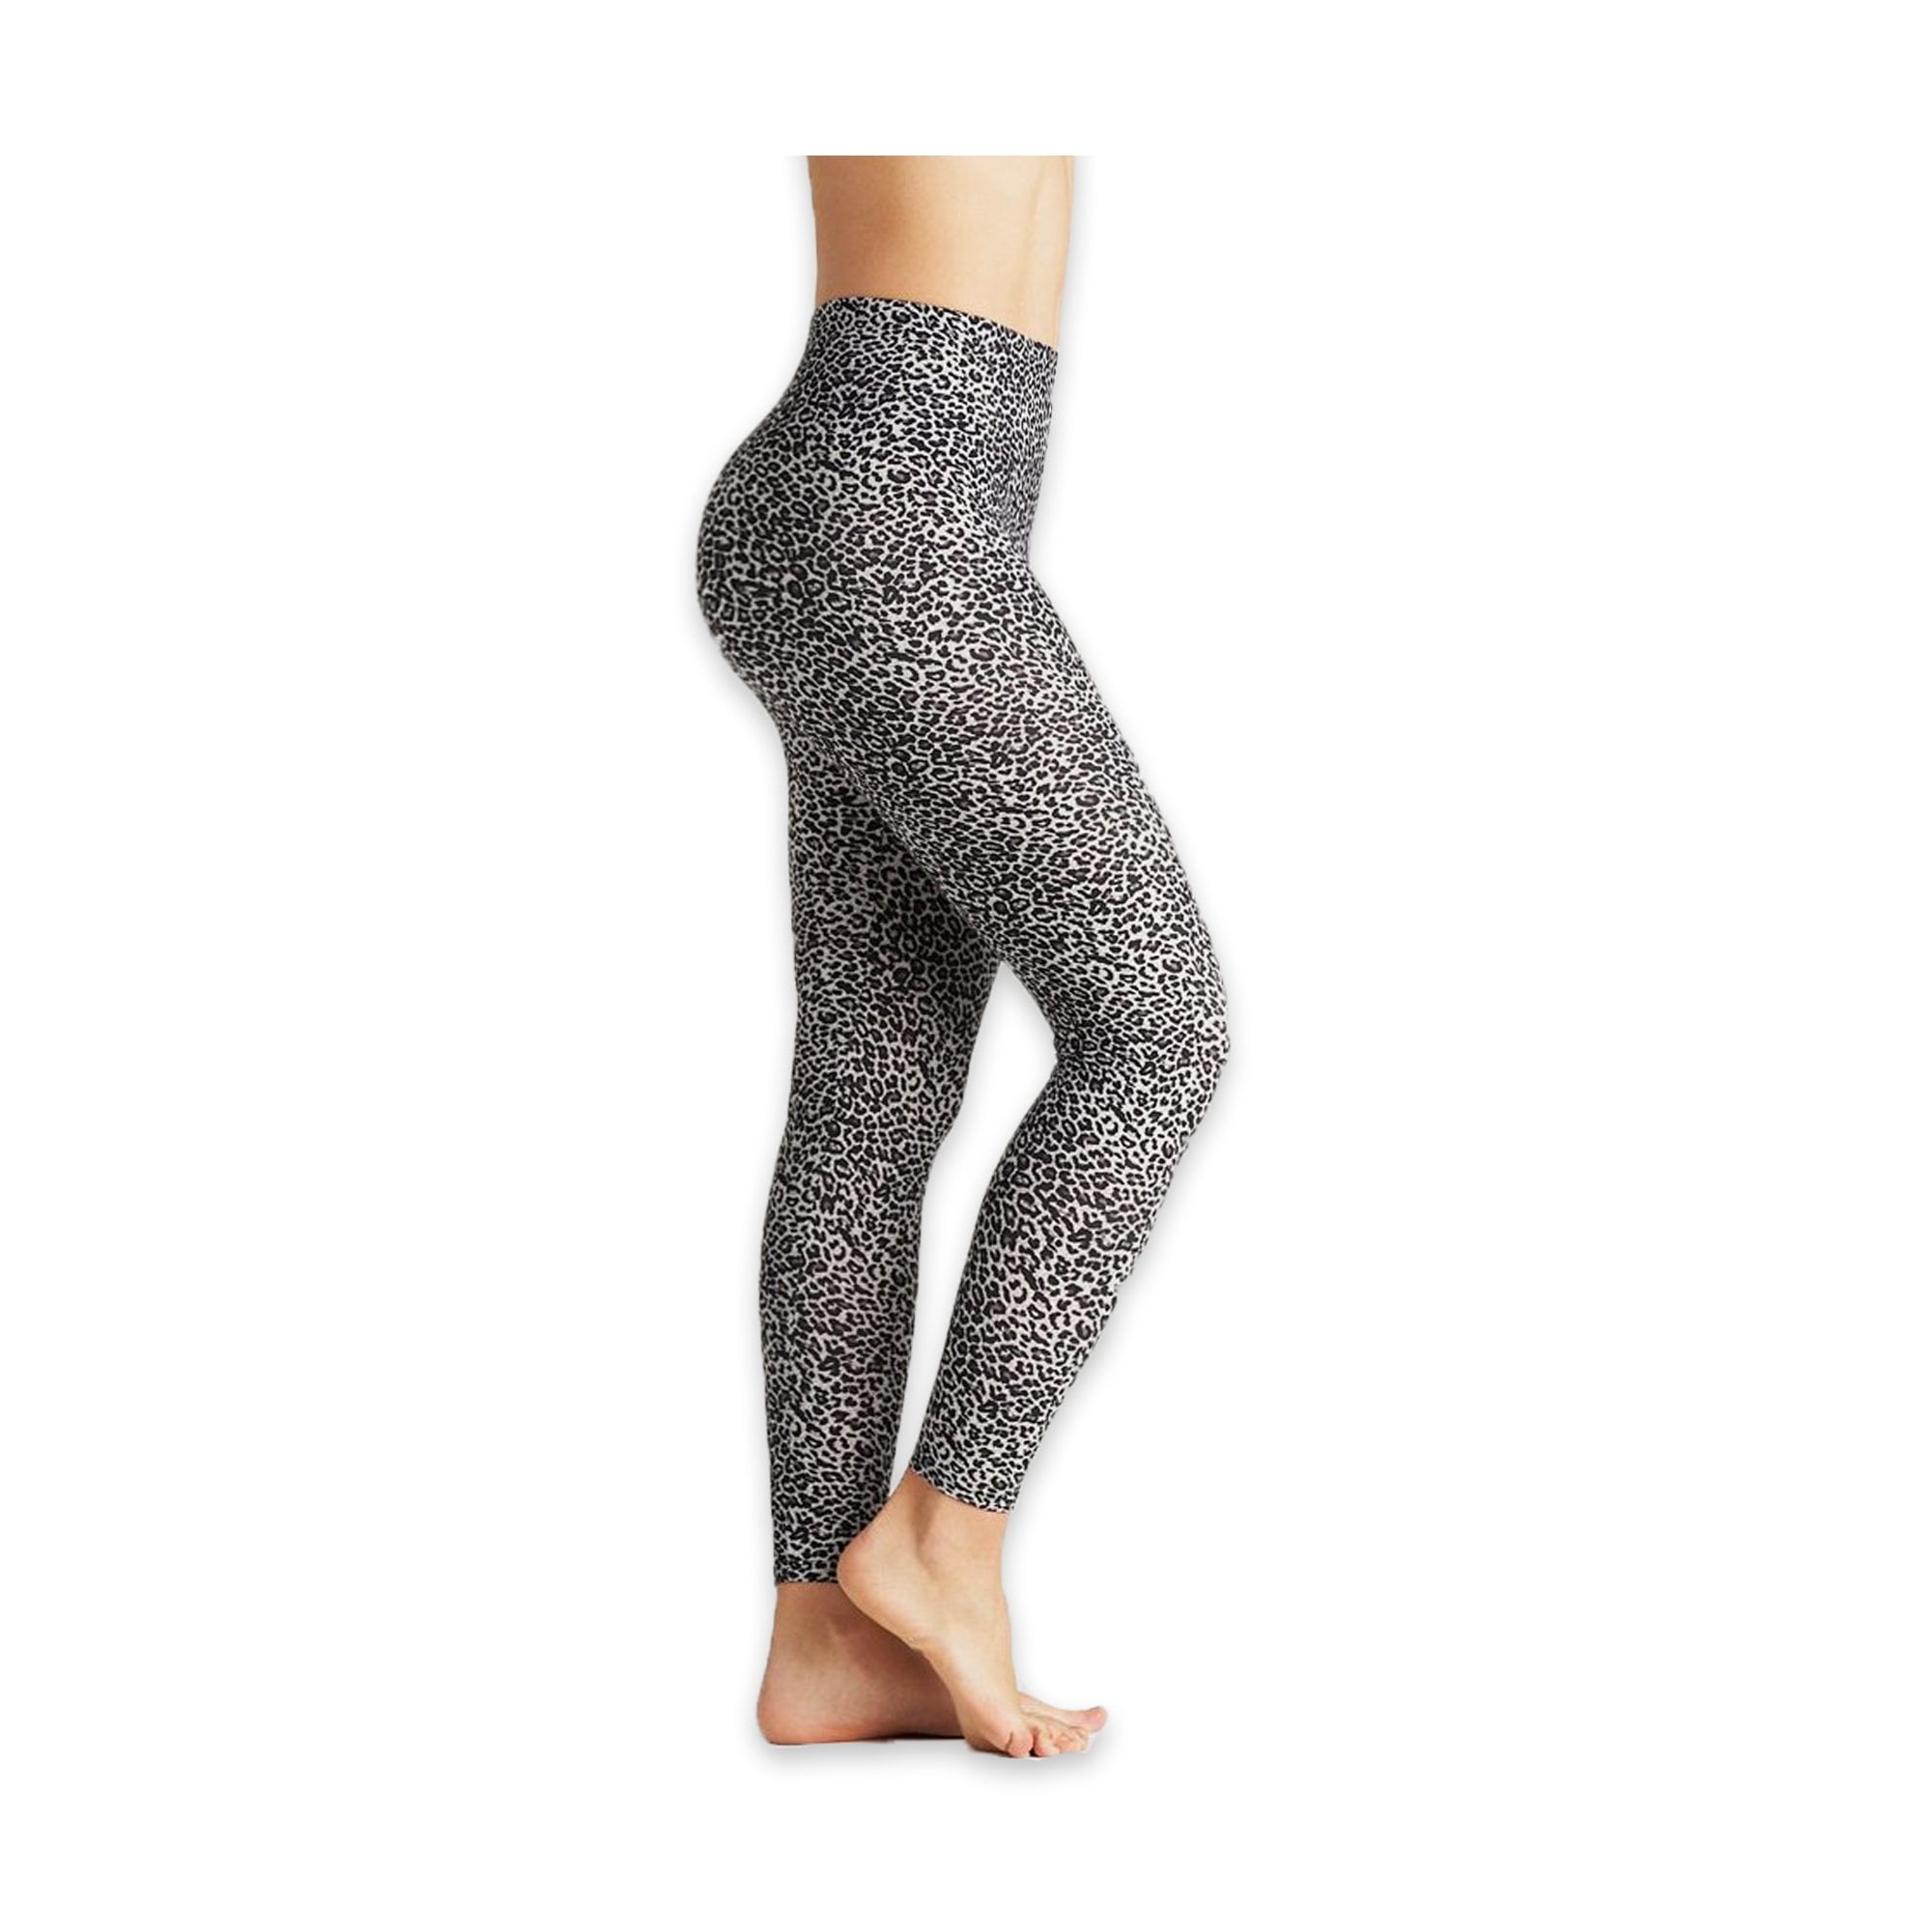 Spanx faux leather camo leggings: Snag these slimming pants for a steal